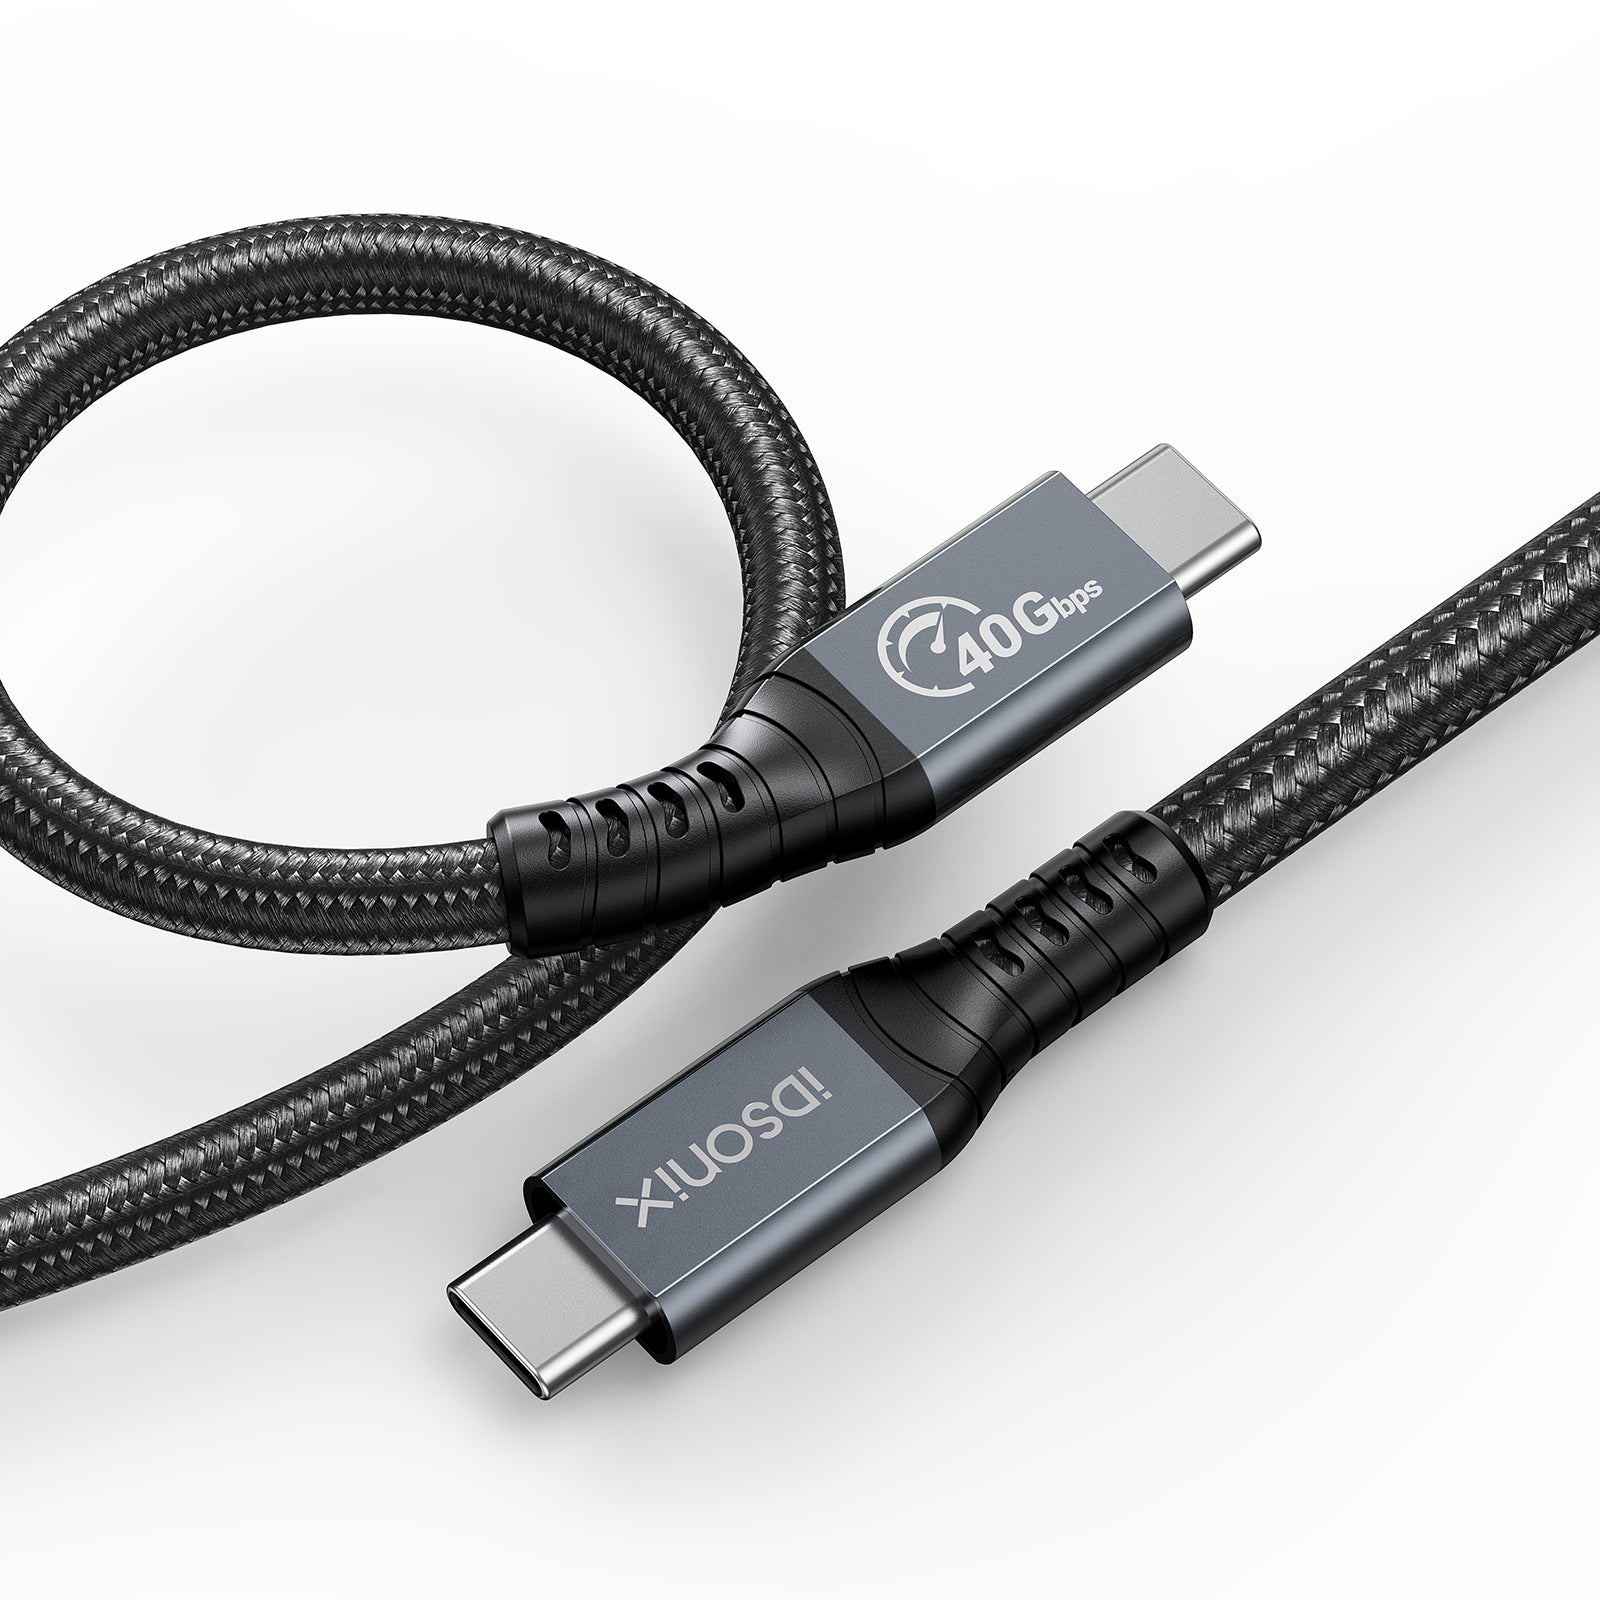 iDsonix Cable for Thunderbolt 4 Cable Supports 40Gbps Data Transfer, Single 8K or Dual 4K Displays,Type C Cable with 100W Charging, Compatible with Thunderbolt 3 Cable, MacBooks, USB C, Hub, SSD etc